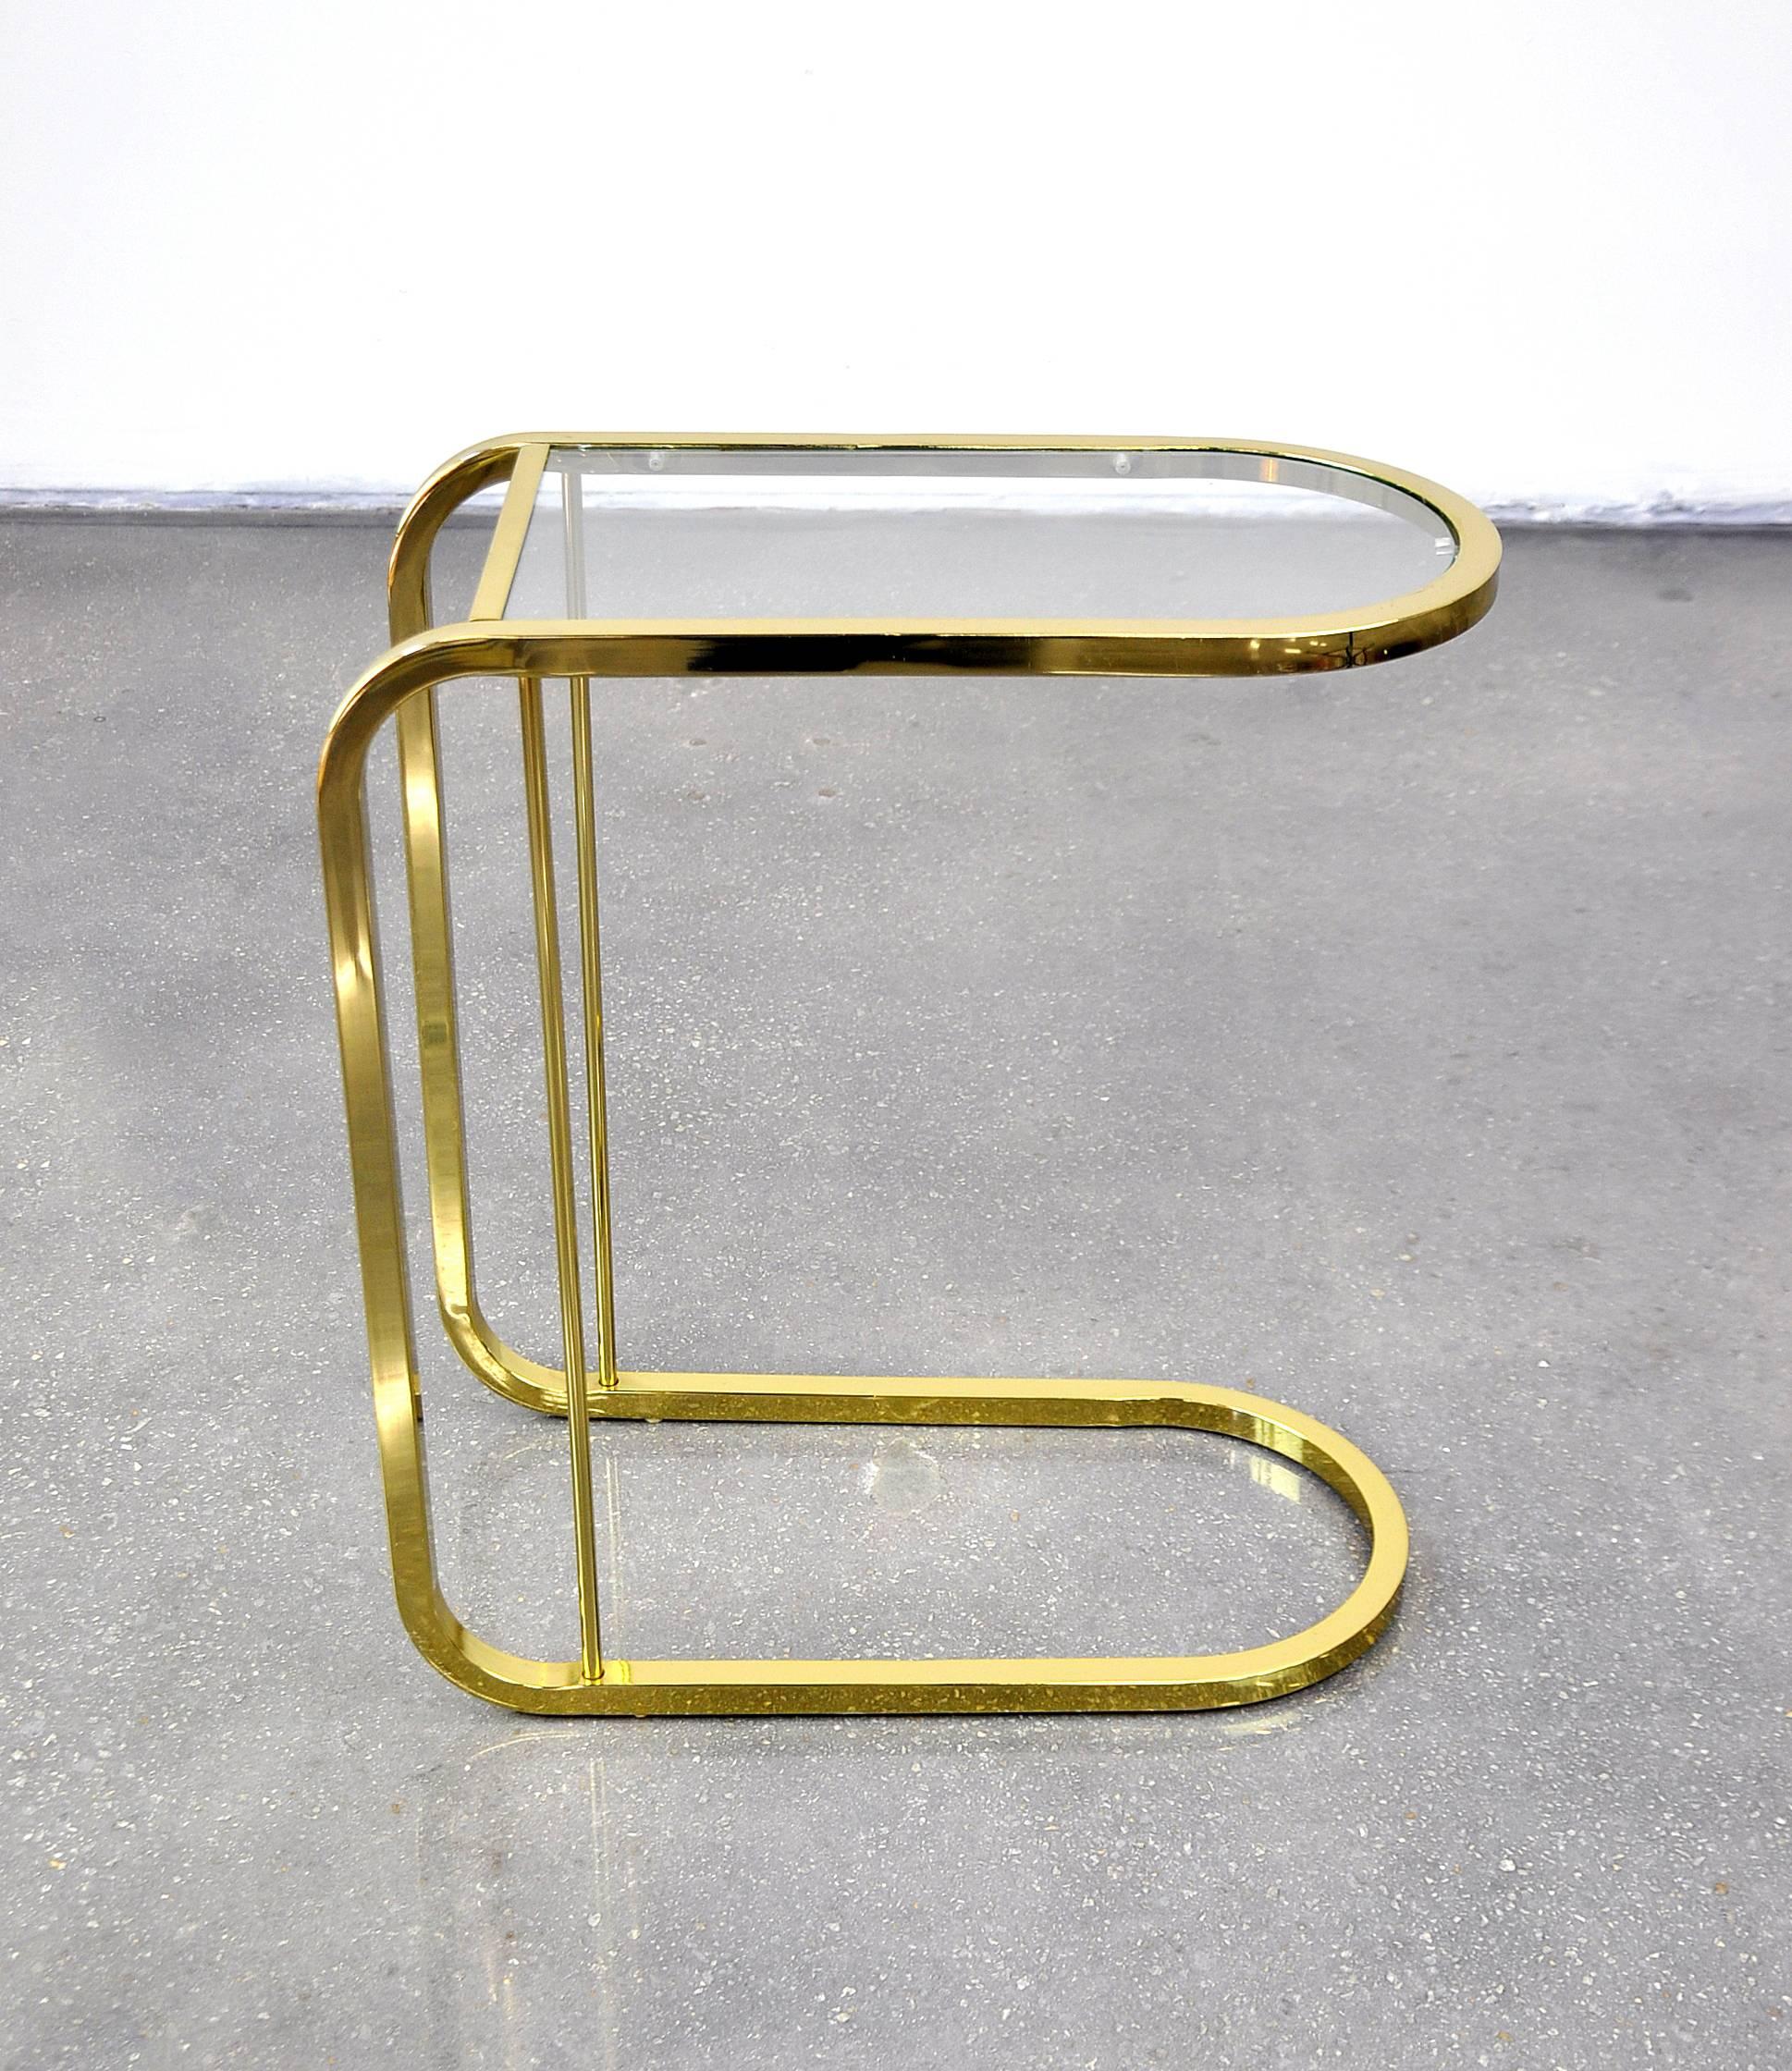 A pretty Mid-Century Modern brass end table of cantilever design with inset glass top, dating from the 1970s, and reminiscent of designs by Milo Baughman for D.I.A. (Design Institute of America) and Thayer Coggin. Its smart design allows the accent